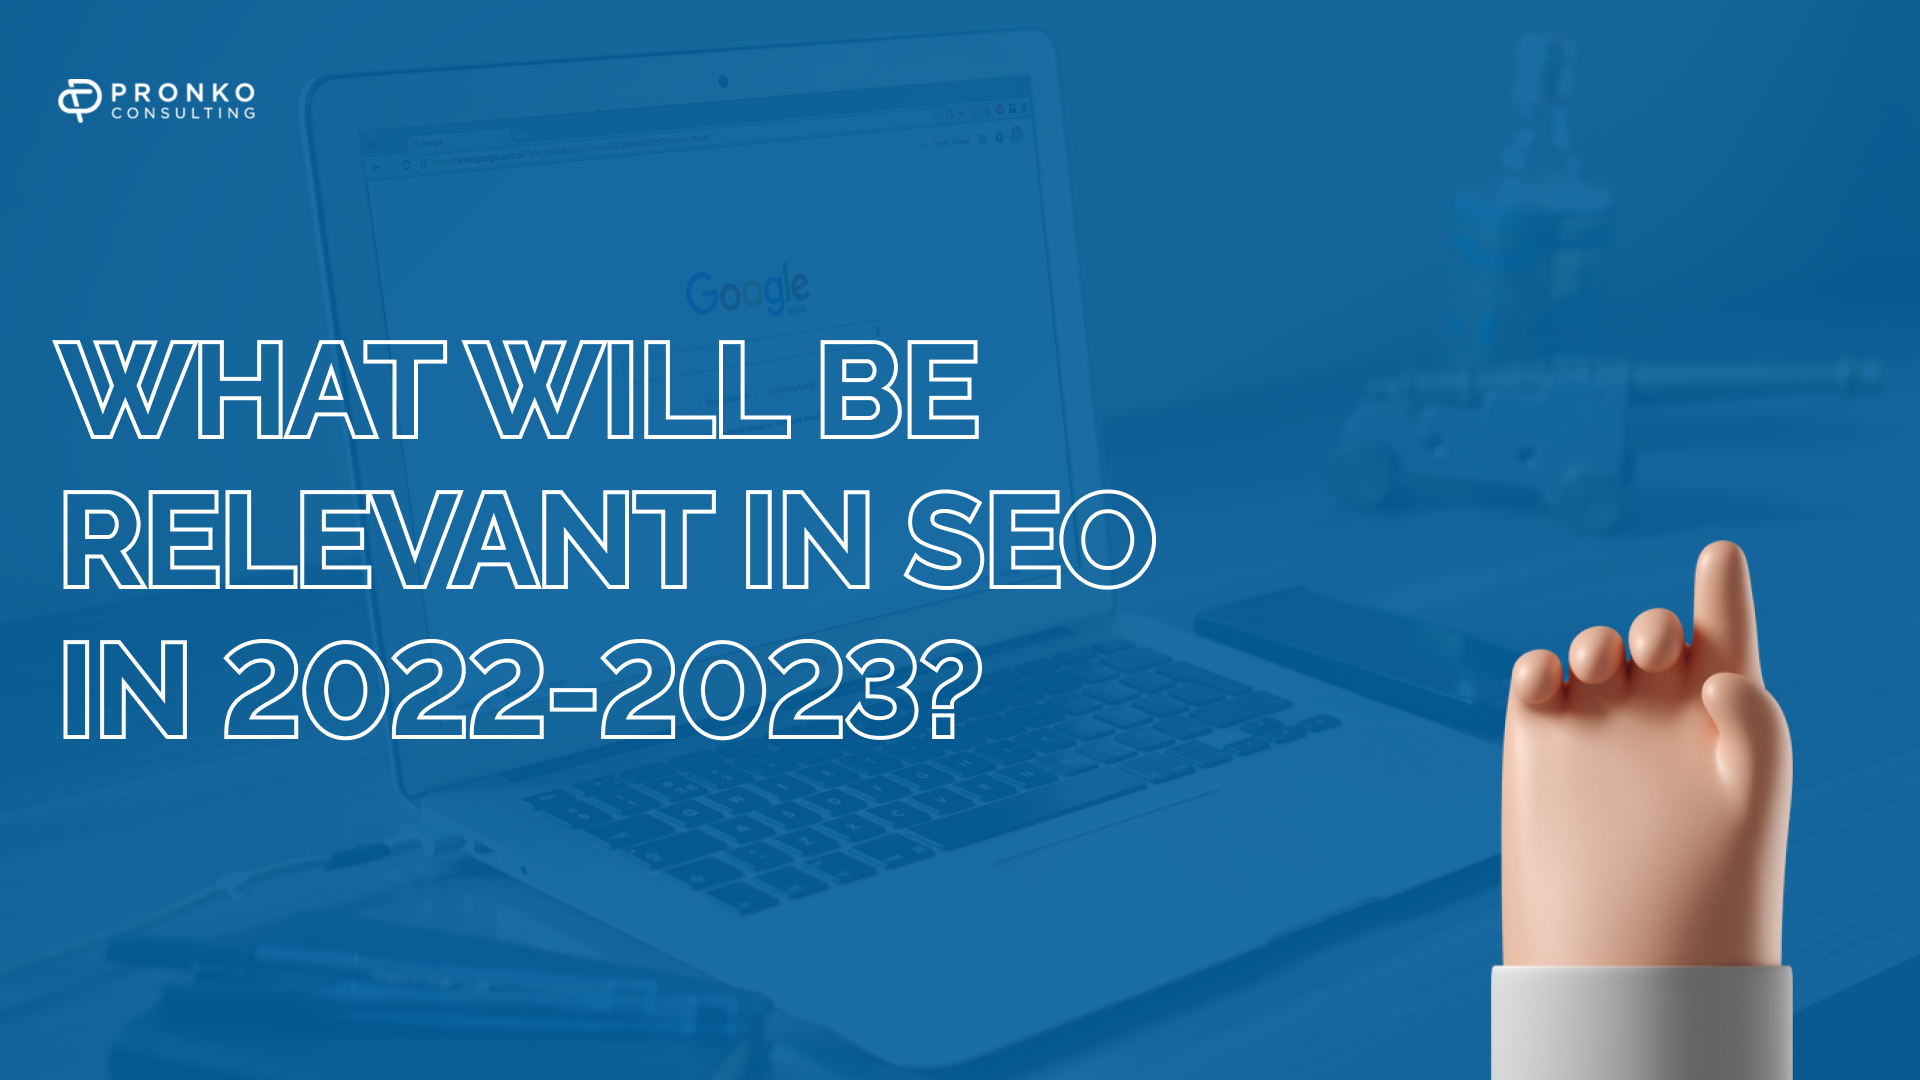 Top 5 SEO Trends for 2022 and 2023